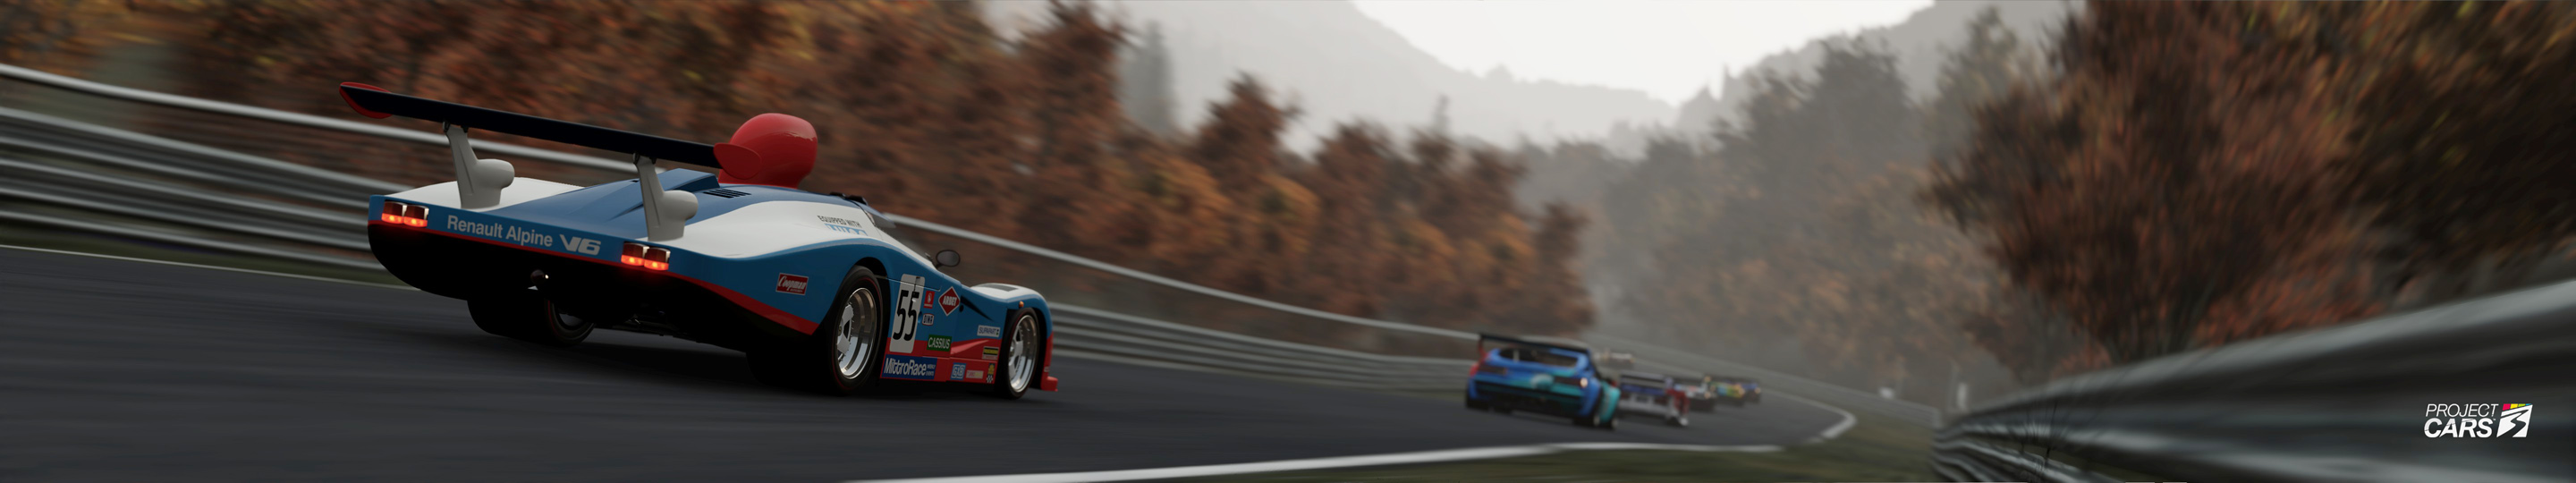 1 PROJECT CARS 3 ALPINE A442B at NORDSCHLEIFE copy.jpg